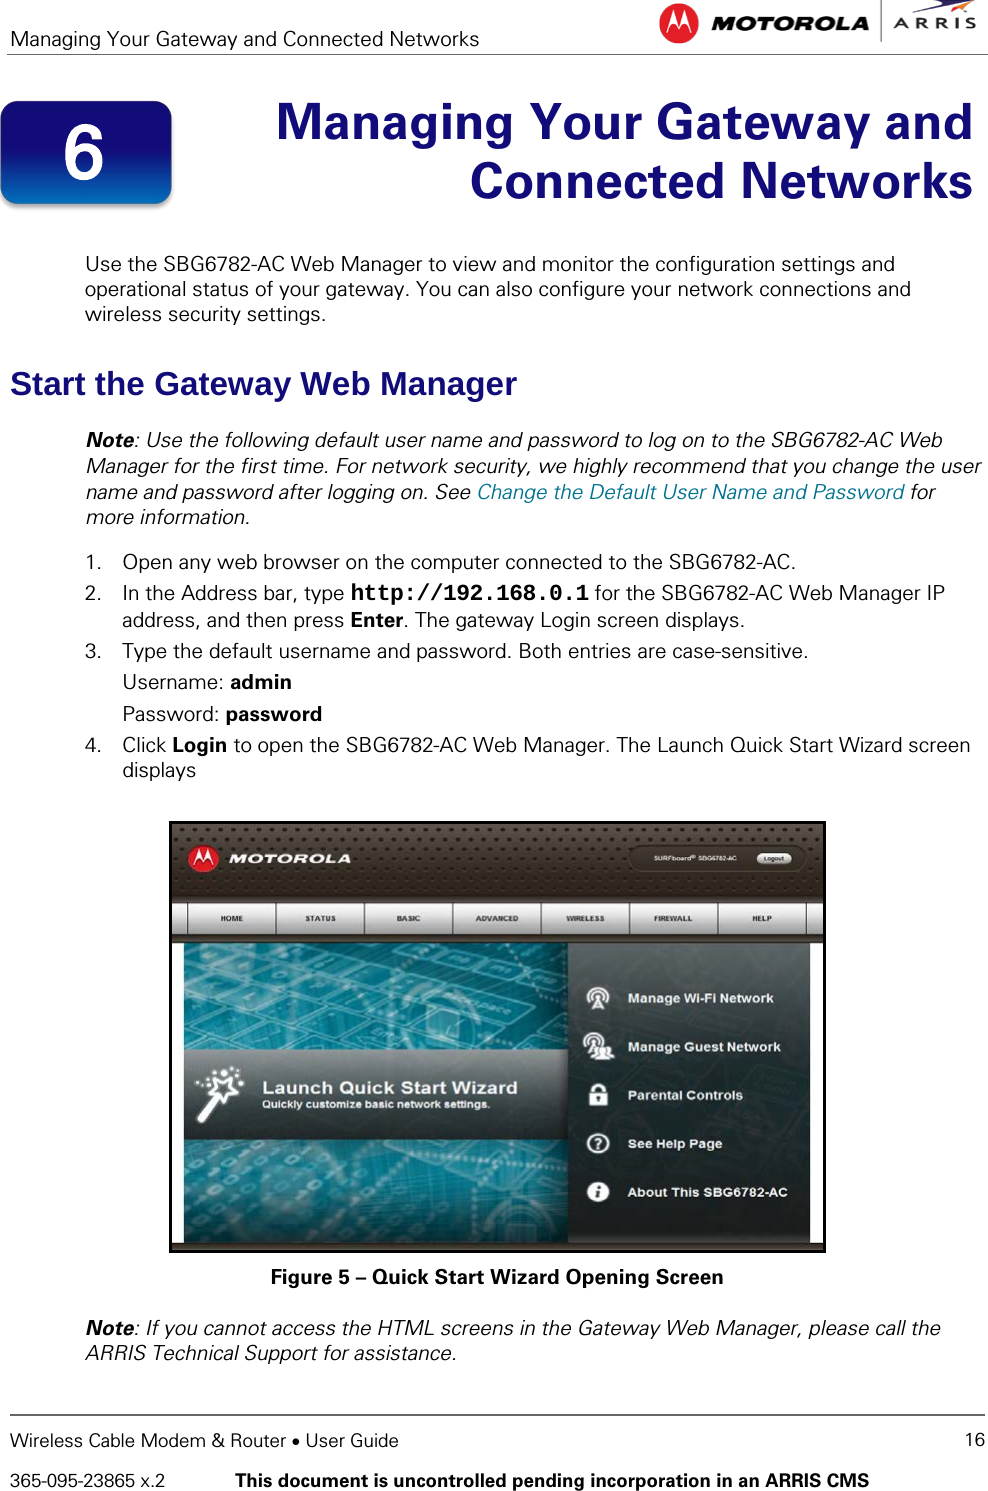 Managing Your Gateway and Connected Networks   Wireless Cable Modem &amp; Router • User Guide 16 365-095-23865 x.2   This document is uncontrolled pending incorporation in an ARRIS CMS   Managing Your Gateway and Connected Networks  Use the SBG6782-AC Web Manager to view and monitor the configuration settings and operational status of your gateway. You can also configure your network connections and wireless security settings. Start the Gateway Web Manager Note: Use the following default user name and password to log on to the SBG6782-AC Web Manager for the first time. For network security, we highly recommend that you change the user name and password after logging on. See Change the Default User Name and Password for more information. 1. Open any web browser on the computer connected to the SBG6782-AC. 2. In the Address bar, type http://192.168.0.1 for the SBG6782-AC Web Manager IP address, and then press Enter. The gateway Login screen displays. 3. Type the default username and password. Both entries are case-sensitive. Username: admin Password: password 4. Click Login to open the SBG6782-AC Web Manager. The Launch Quick Start Wizard screen displays  Figure 5 – Quick Start Wizard Opening Screen Note: If you cannot access the HTML screens in the Gateway Web Manager, please call the ARRIS Technical Support for assistance. 6 